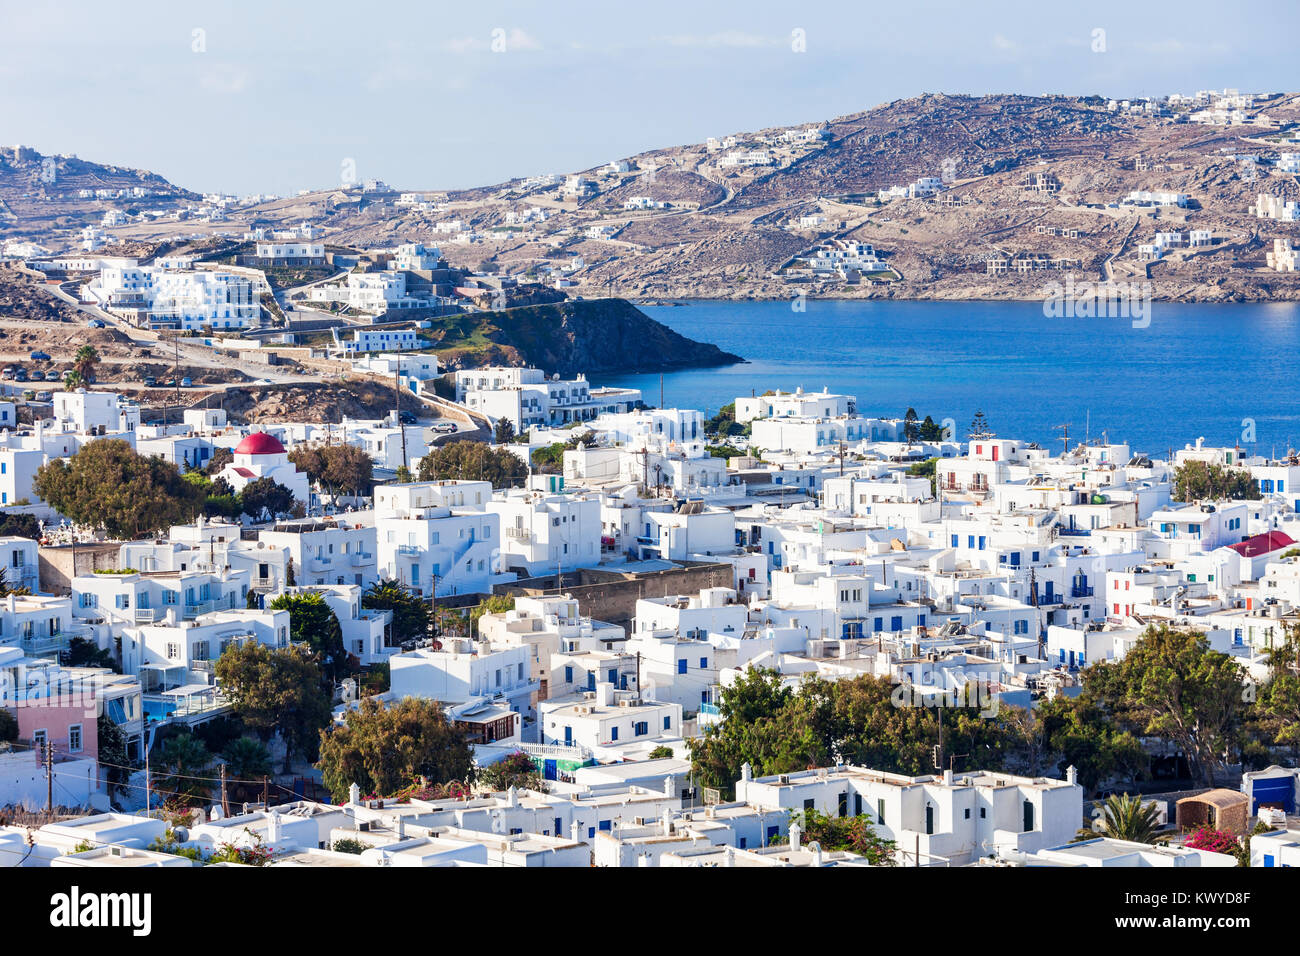 Mykonos island aerial panoramic view. Mykonos is a island, part of the Cyclades in Greece. Stock Photo